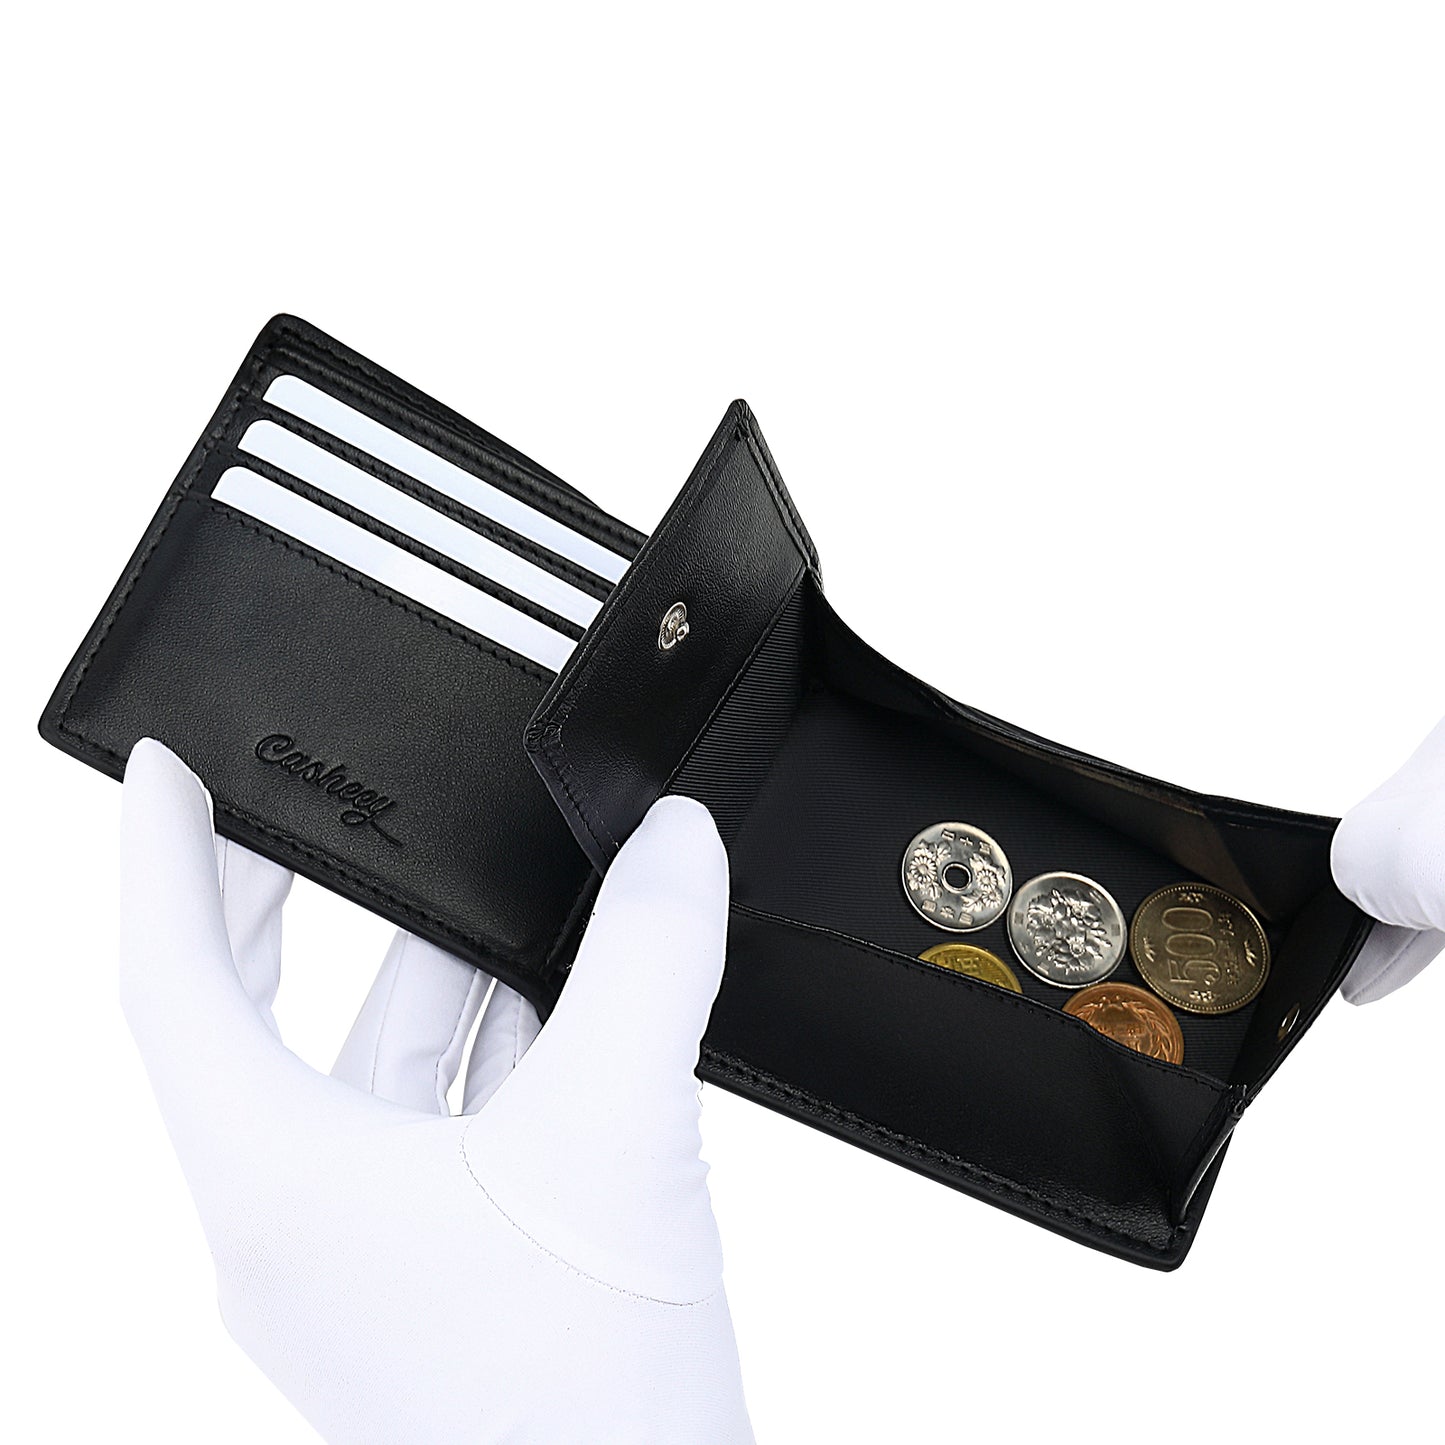 Carbon Leather Wallet | Coin Box Design